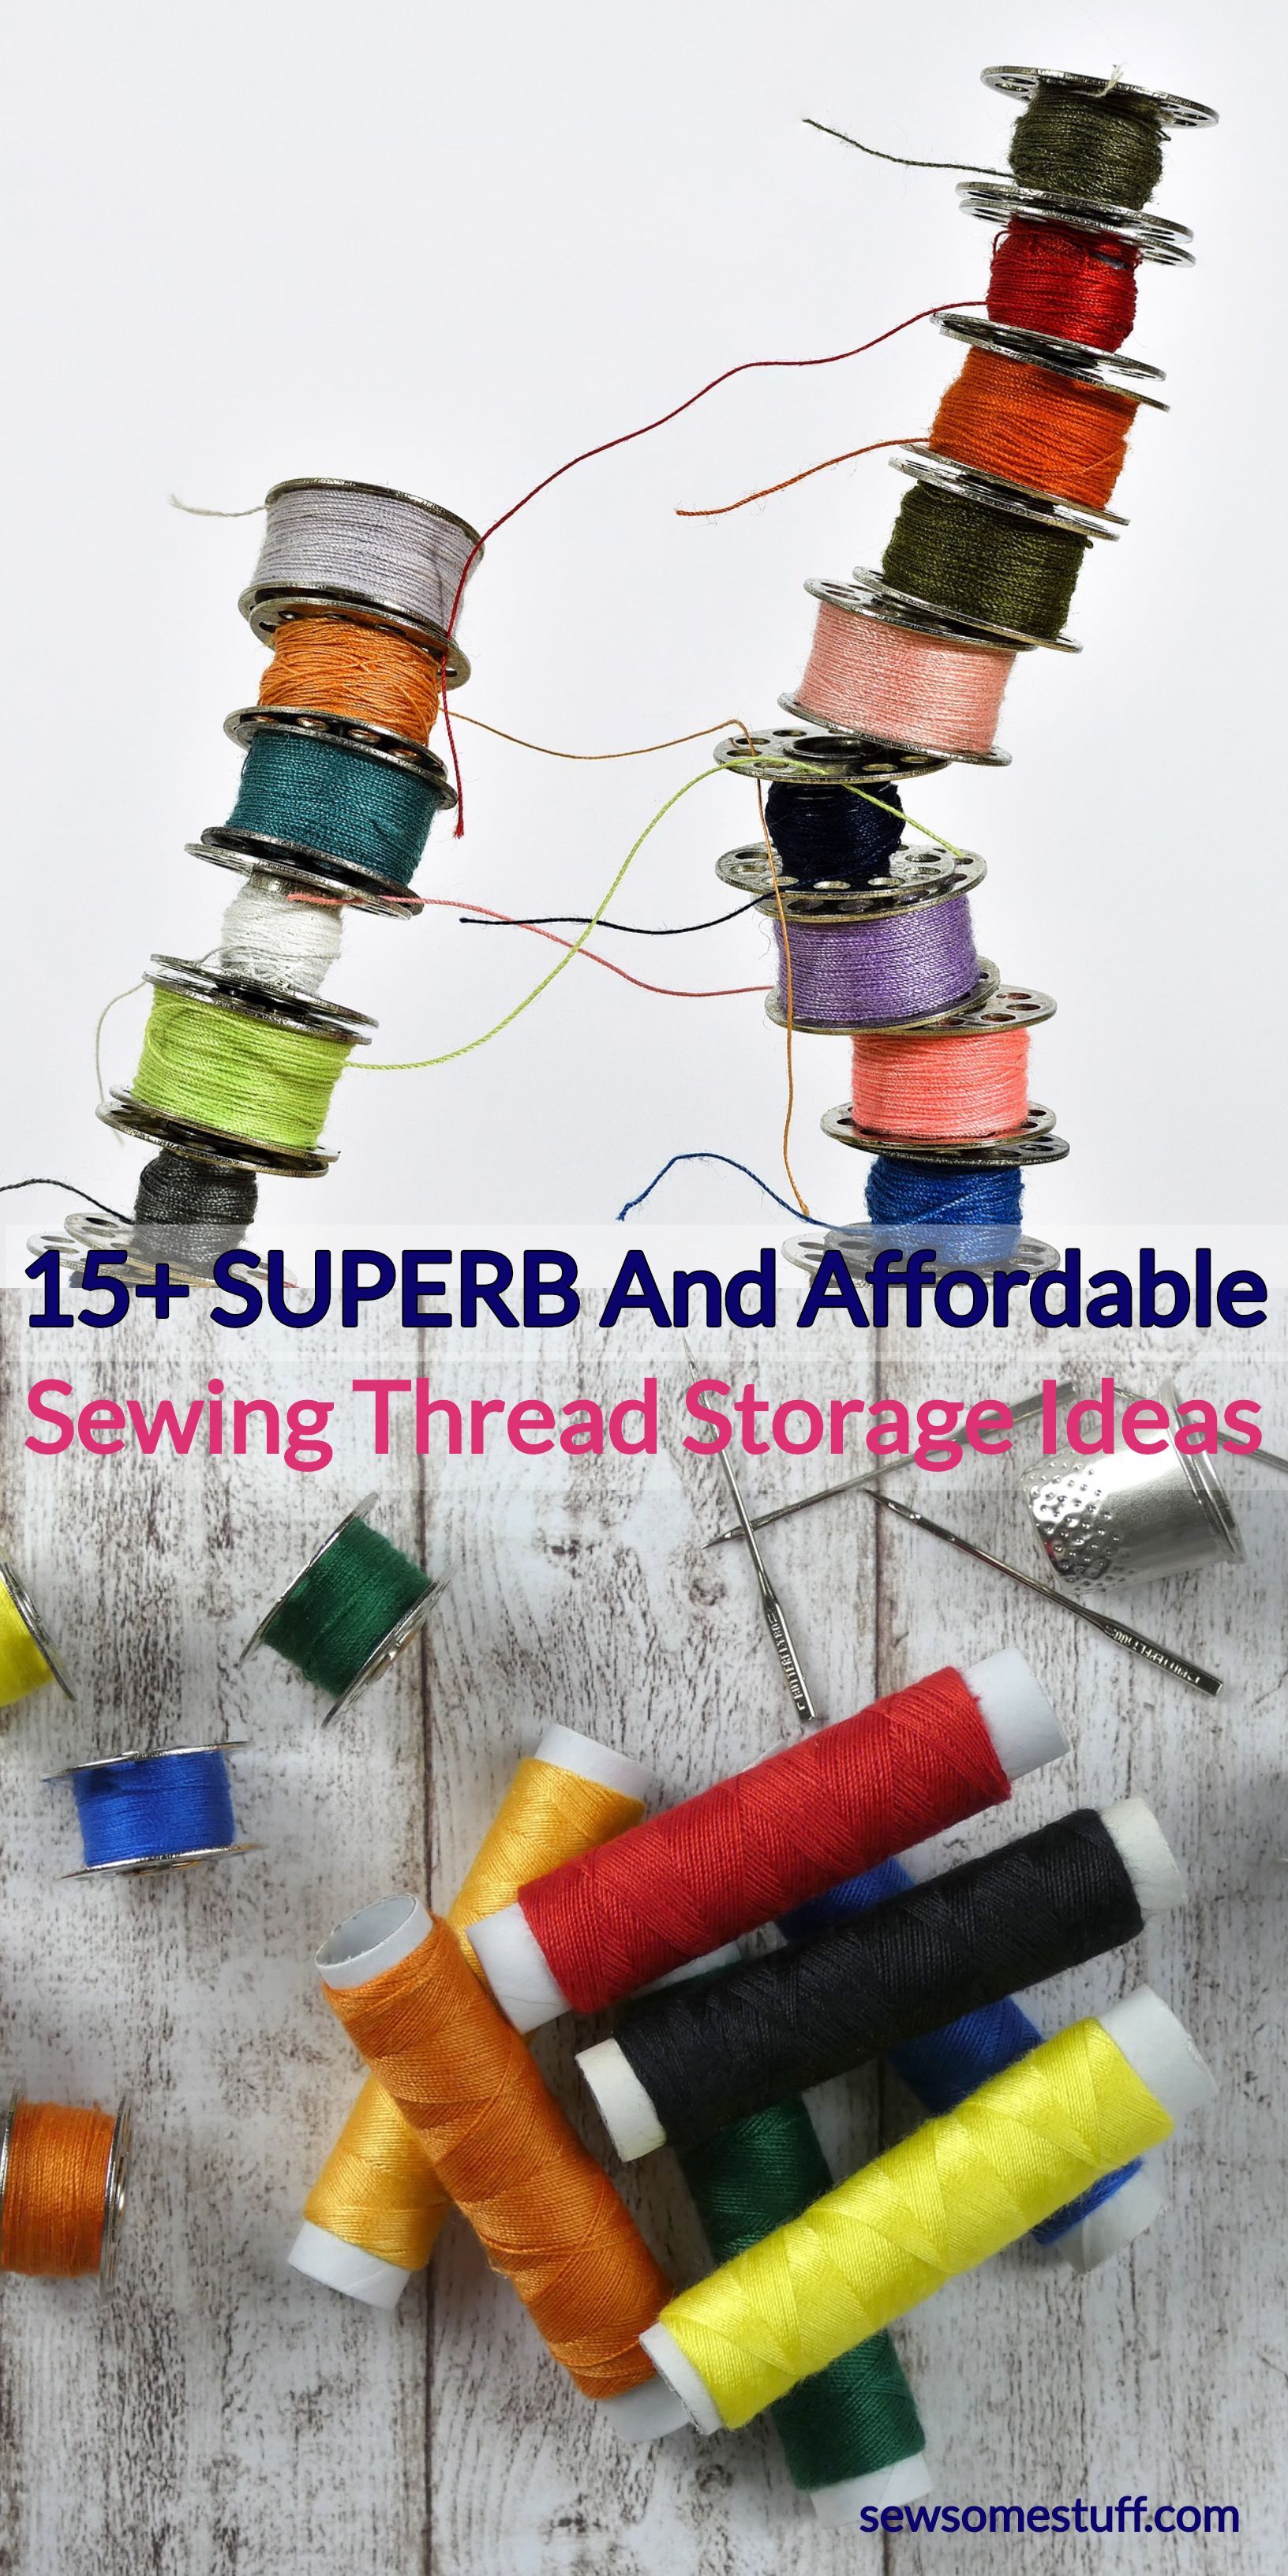 15+ SUPERB and Affordable Sewing Thread Storage Ideas